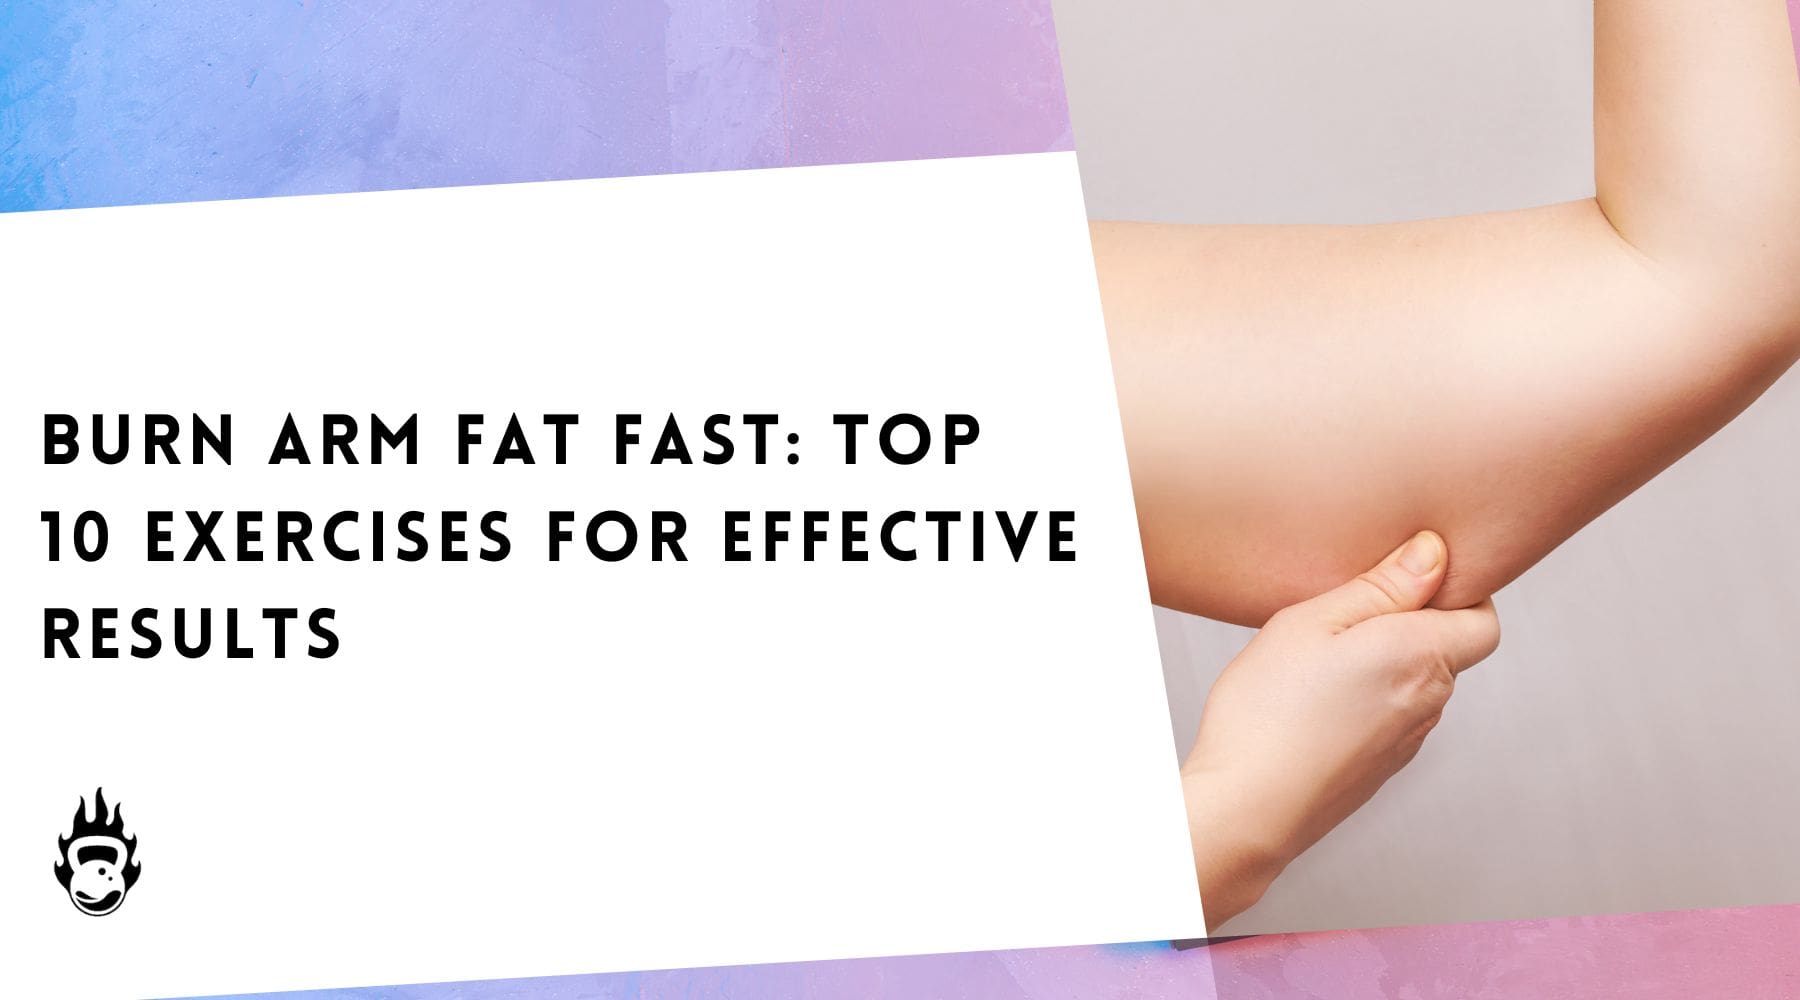 Burn Arm Fat Fast At Home: Top 10 Exercises for Effective Results